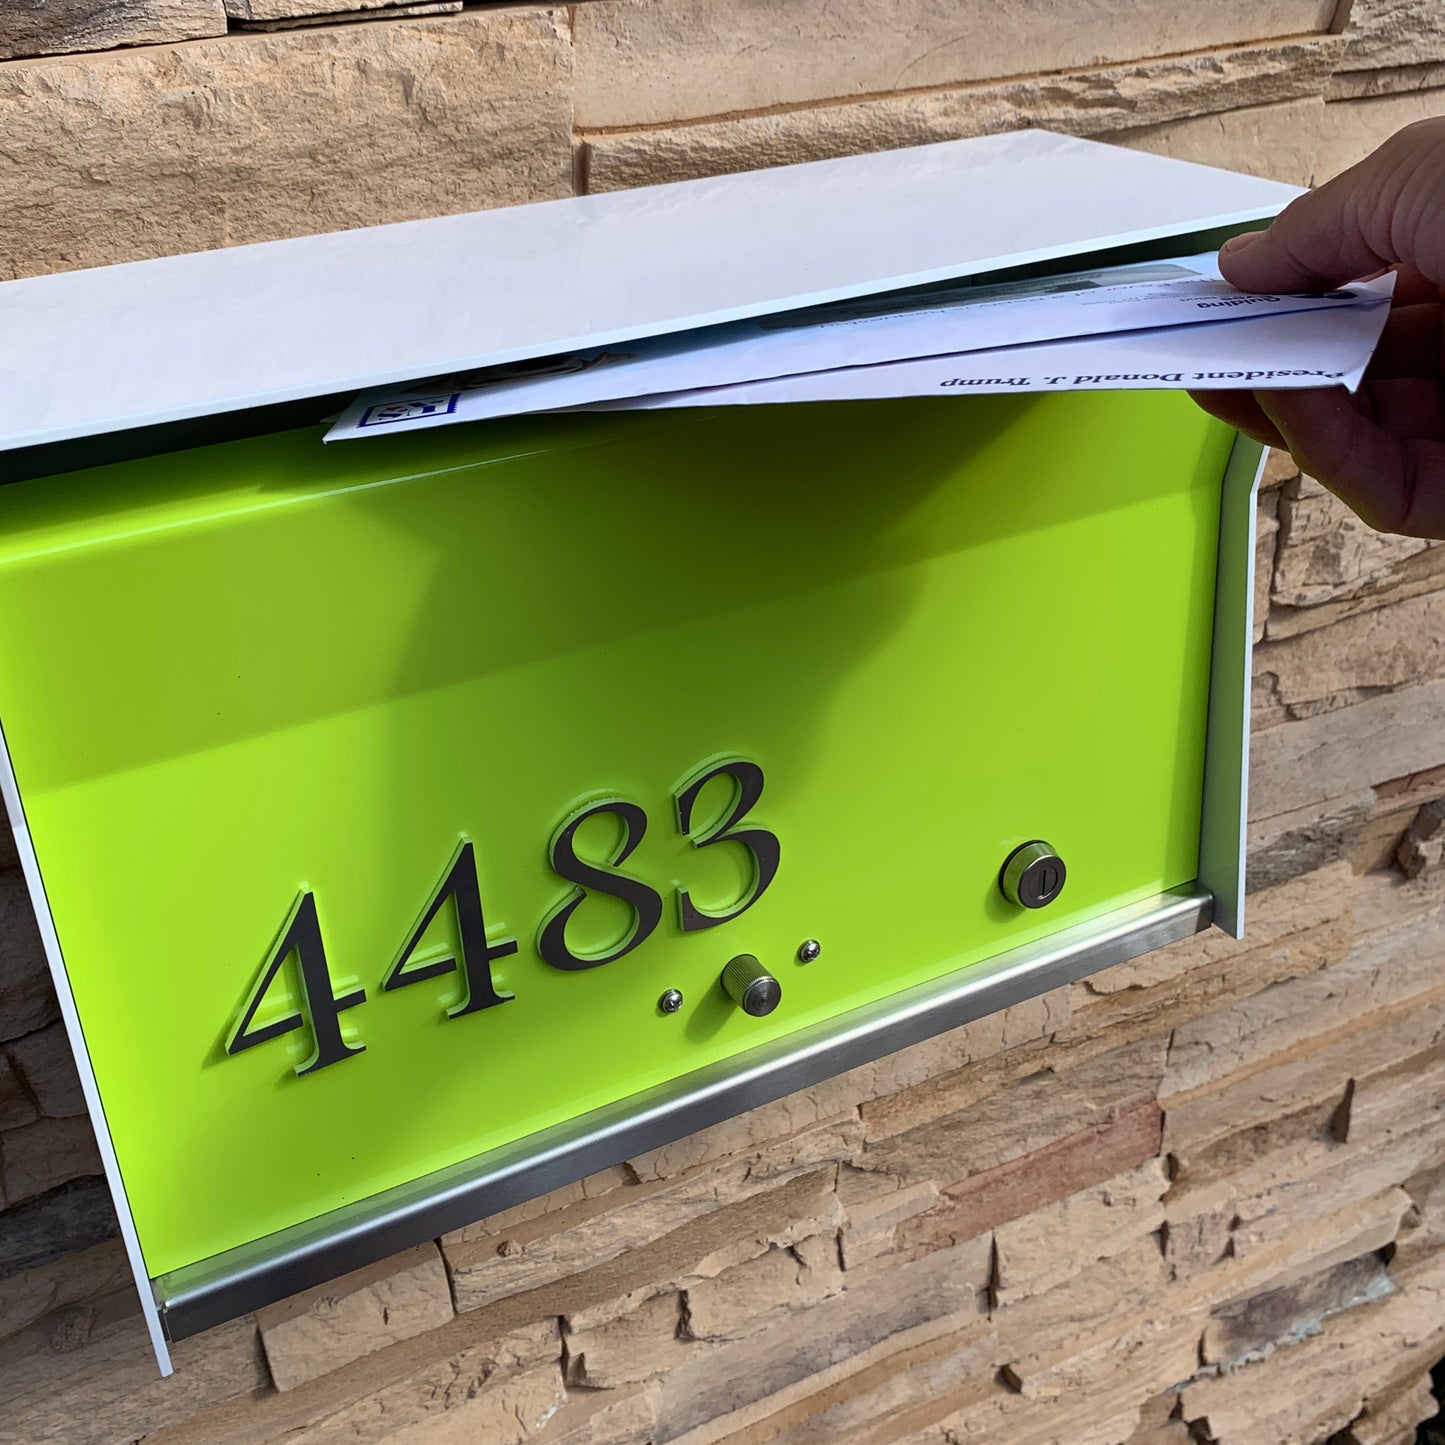 Wall Mount Mailbox mounted to outdoor wall. RetroBox in arctic white and lemon lime